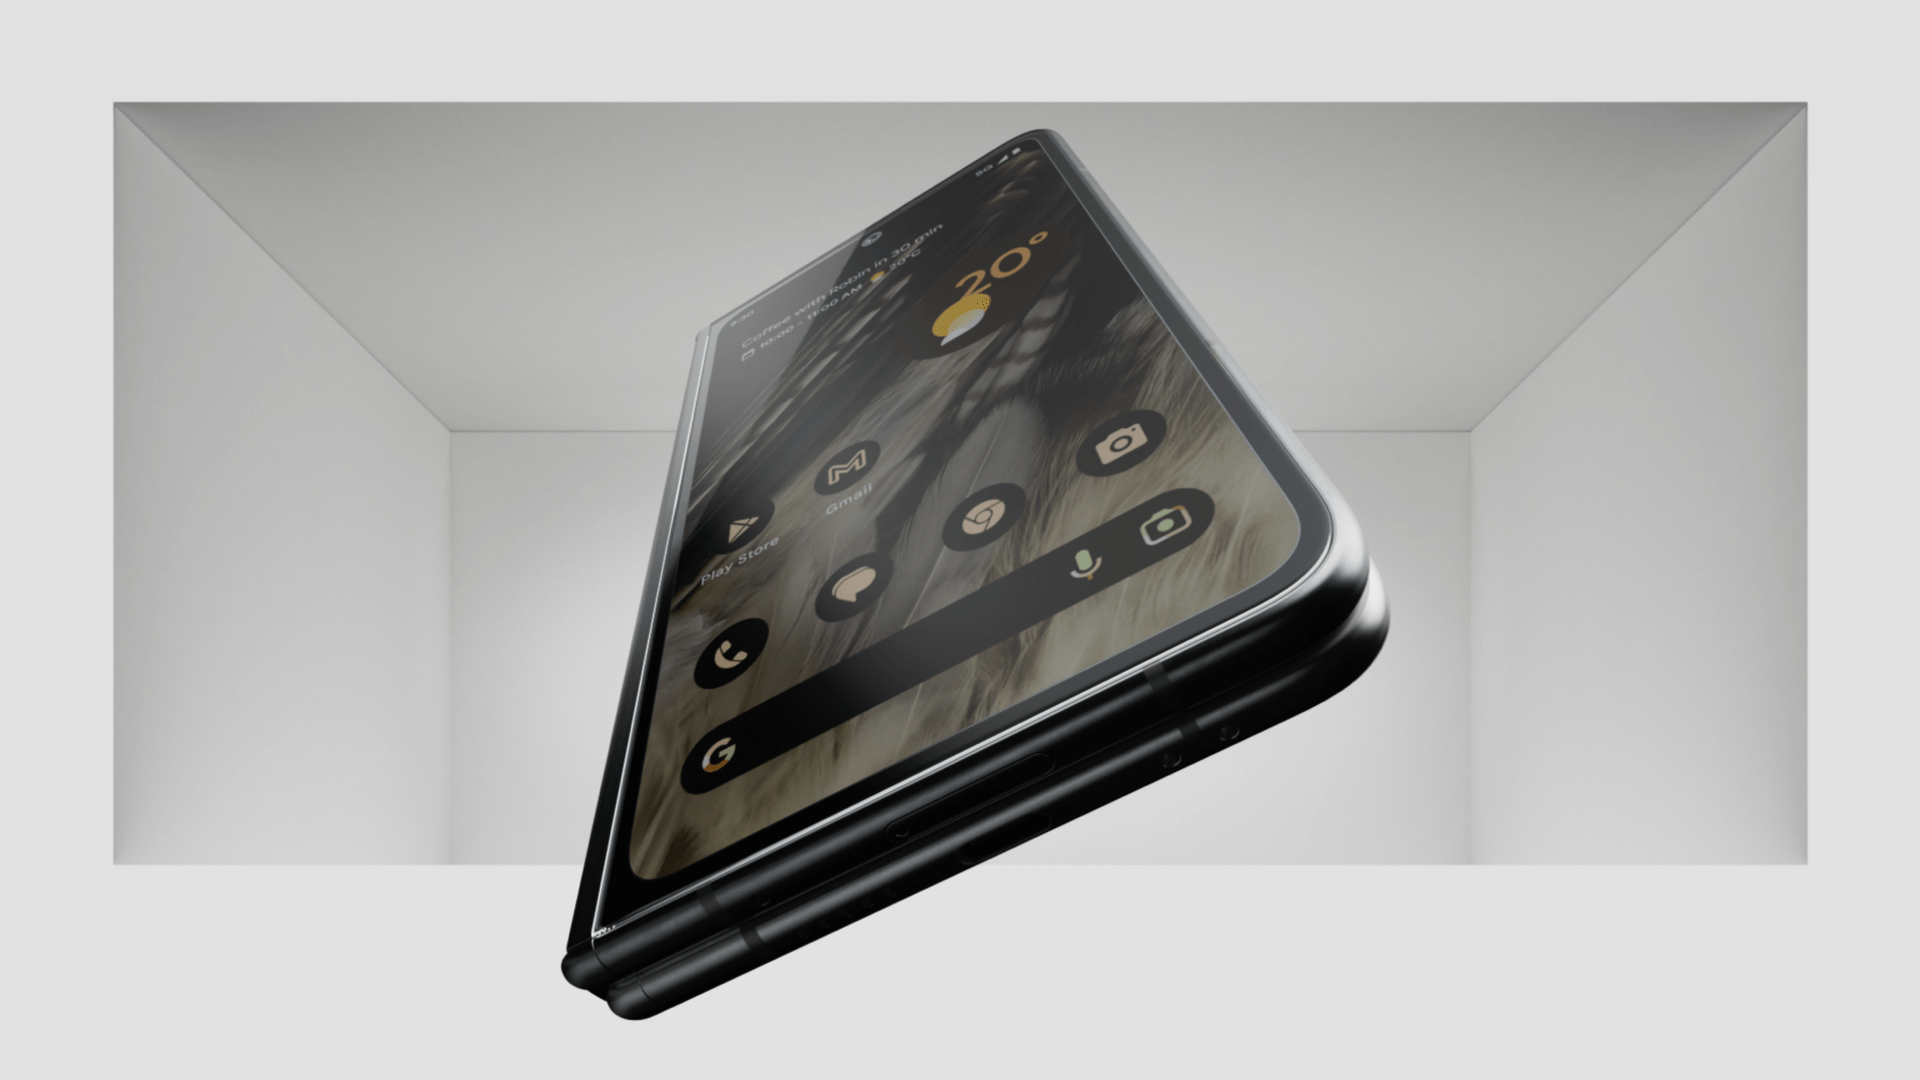 3D Render of phone with lighting applied